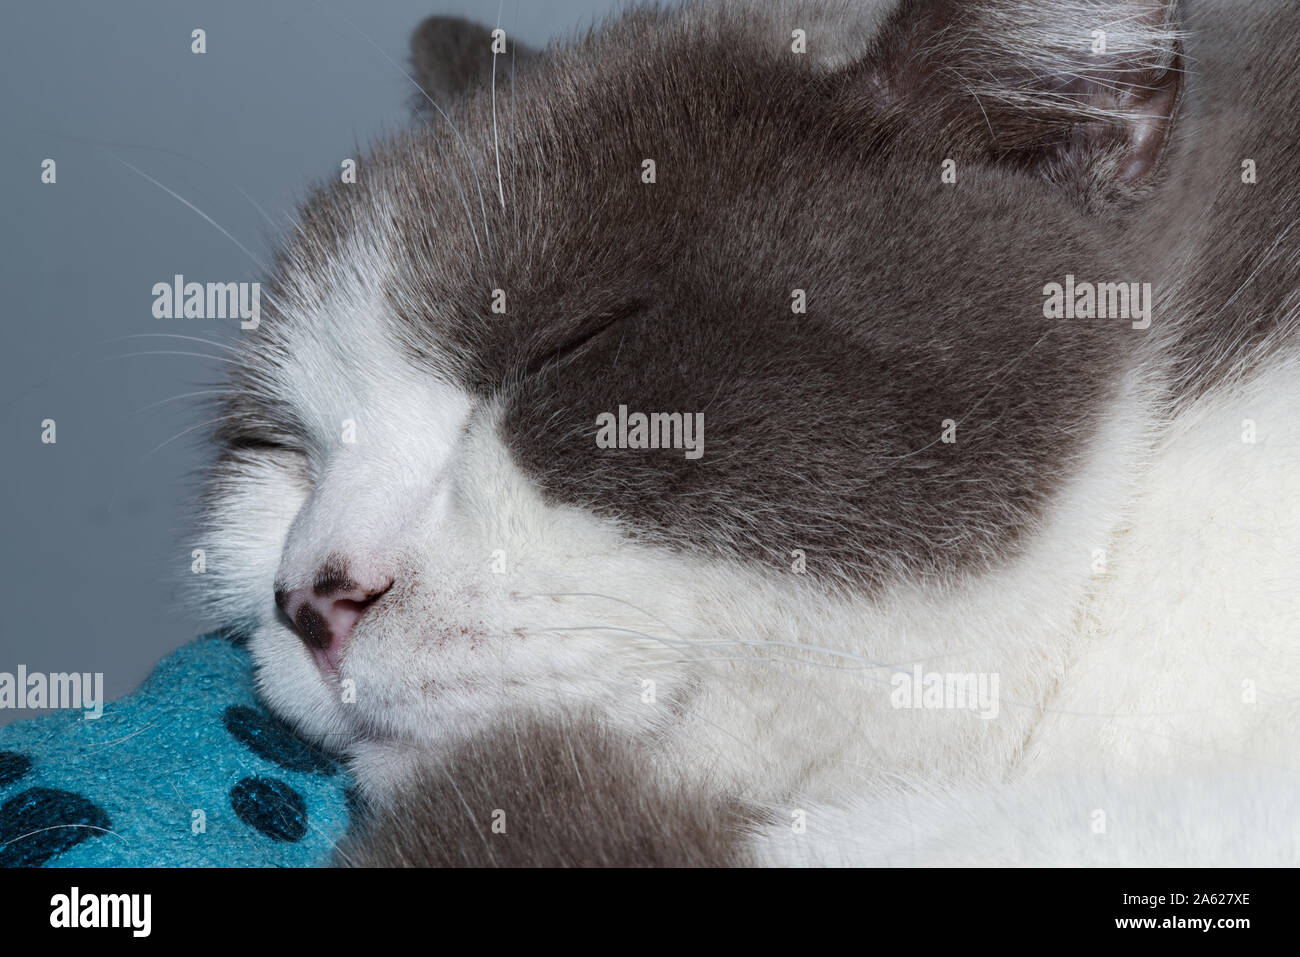 Close-up of a sleeping cat with white silver fur Stock Photo